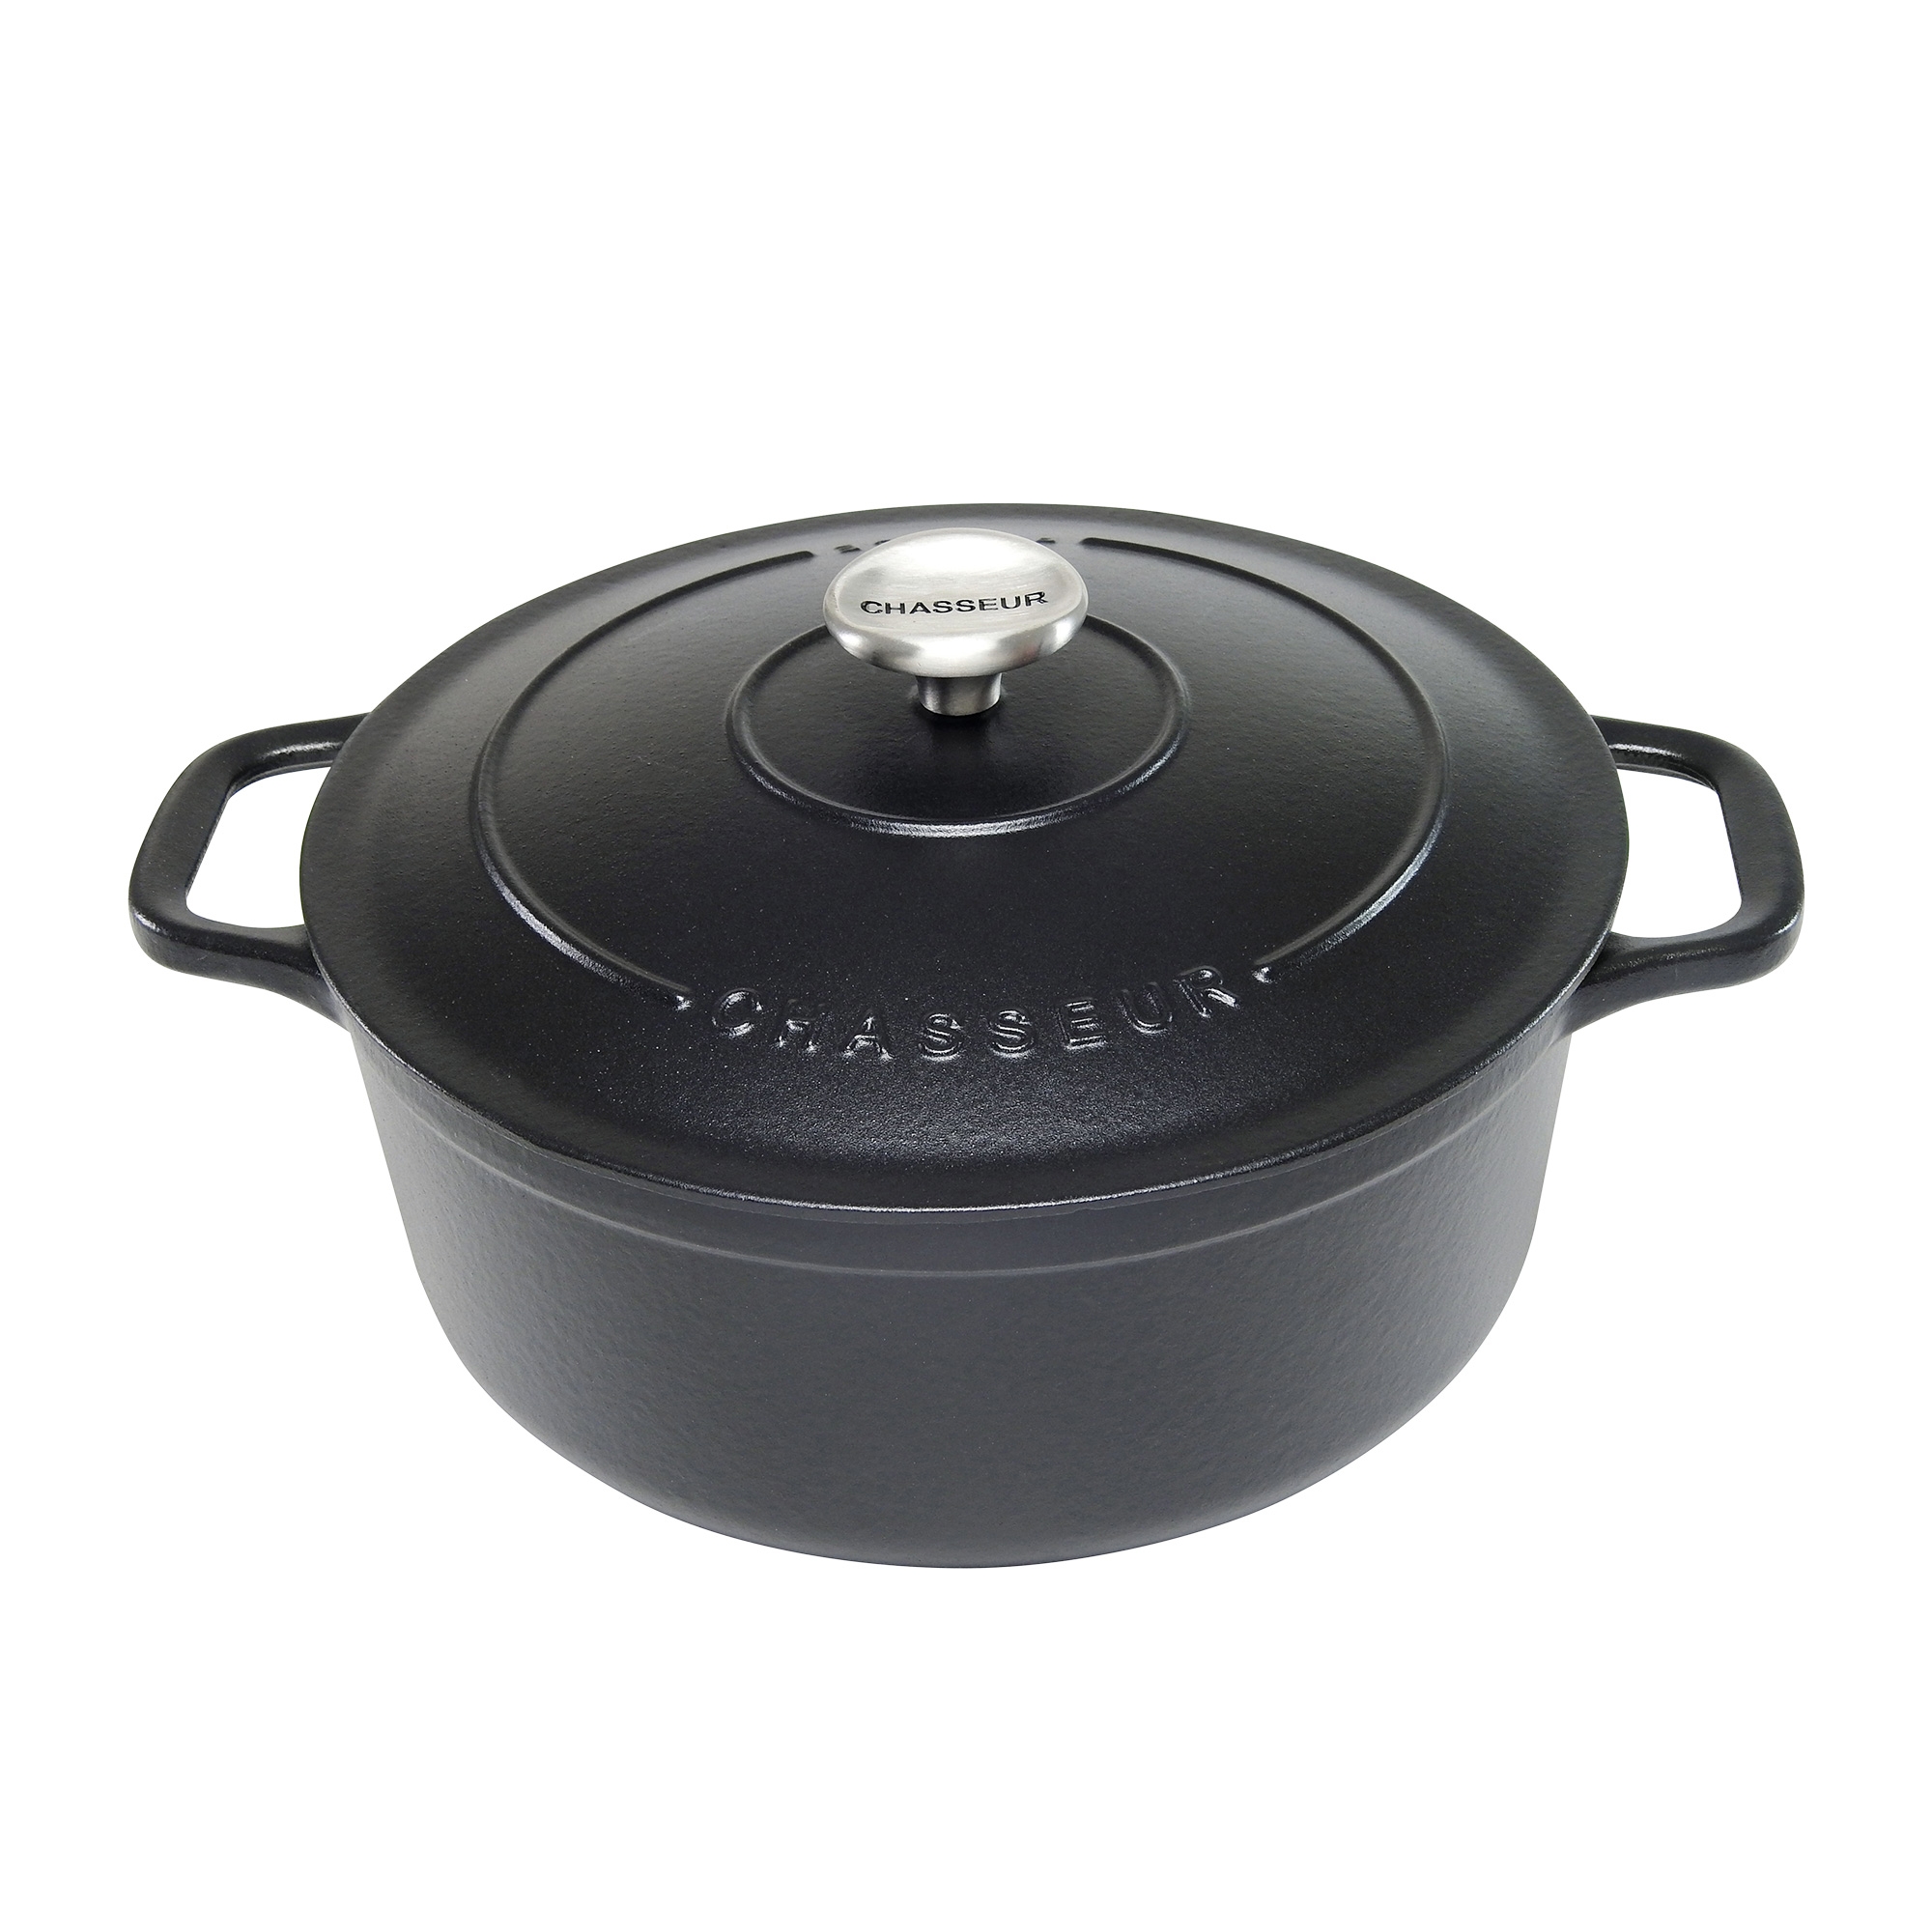 Chasseur Round French Oven 32cm - 8.8L Matte Black Image 1